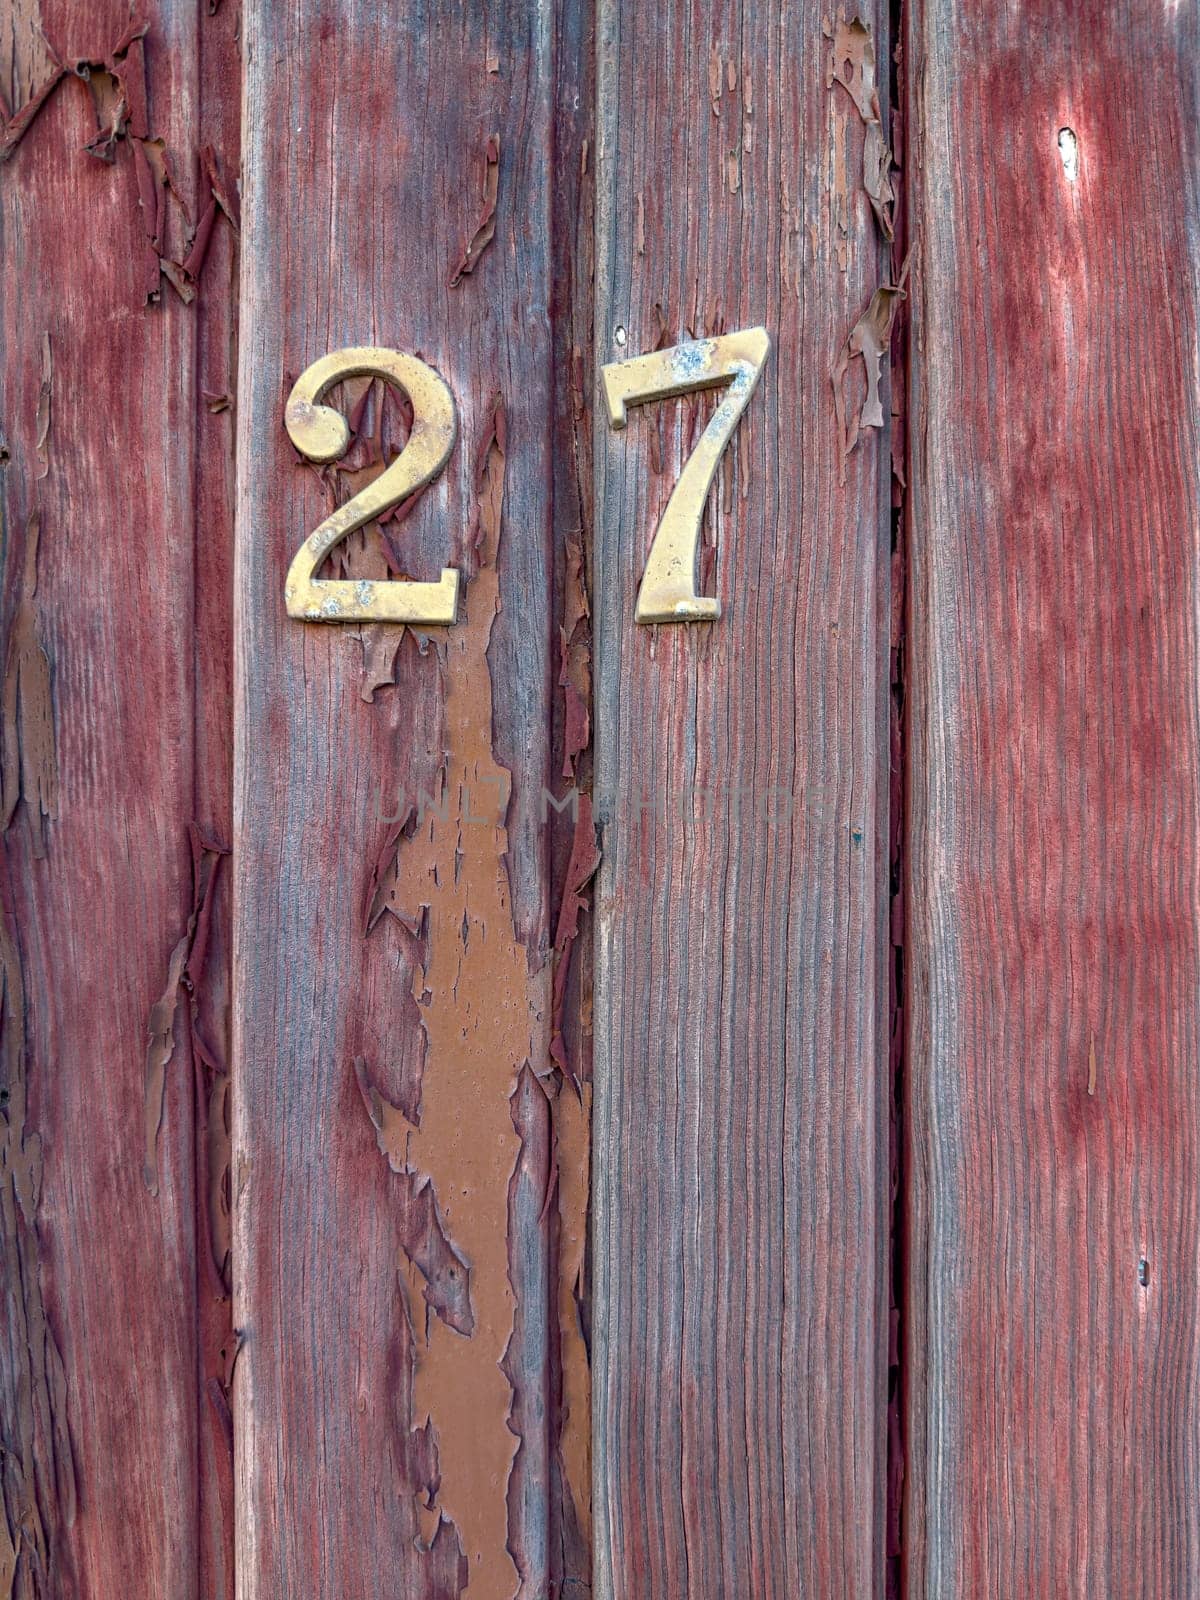 Number 27 on red painted old wooden wall. Red background.